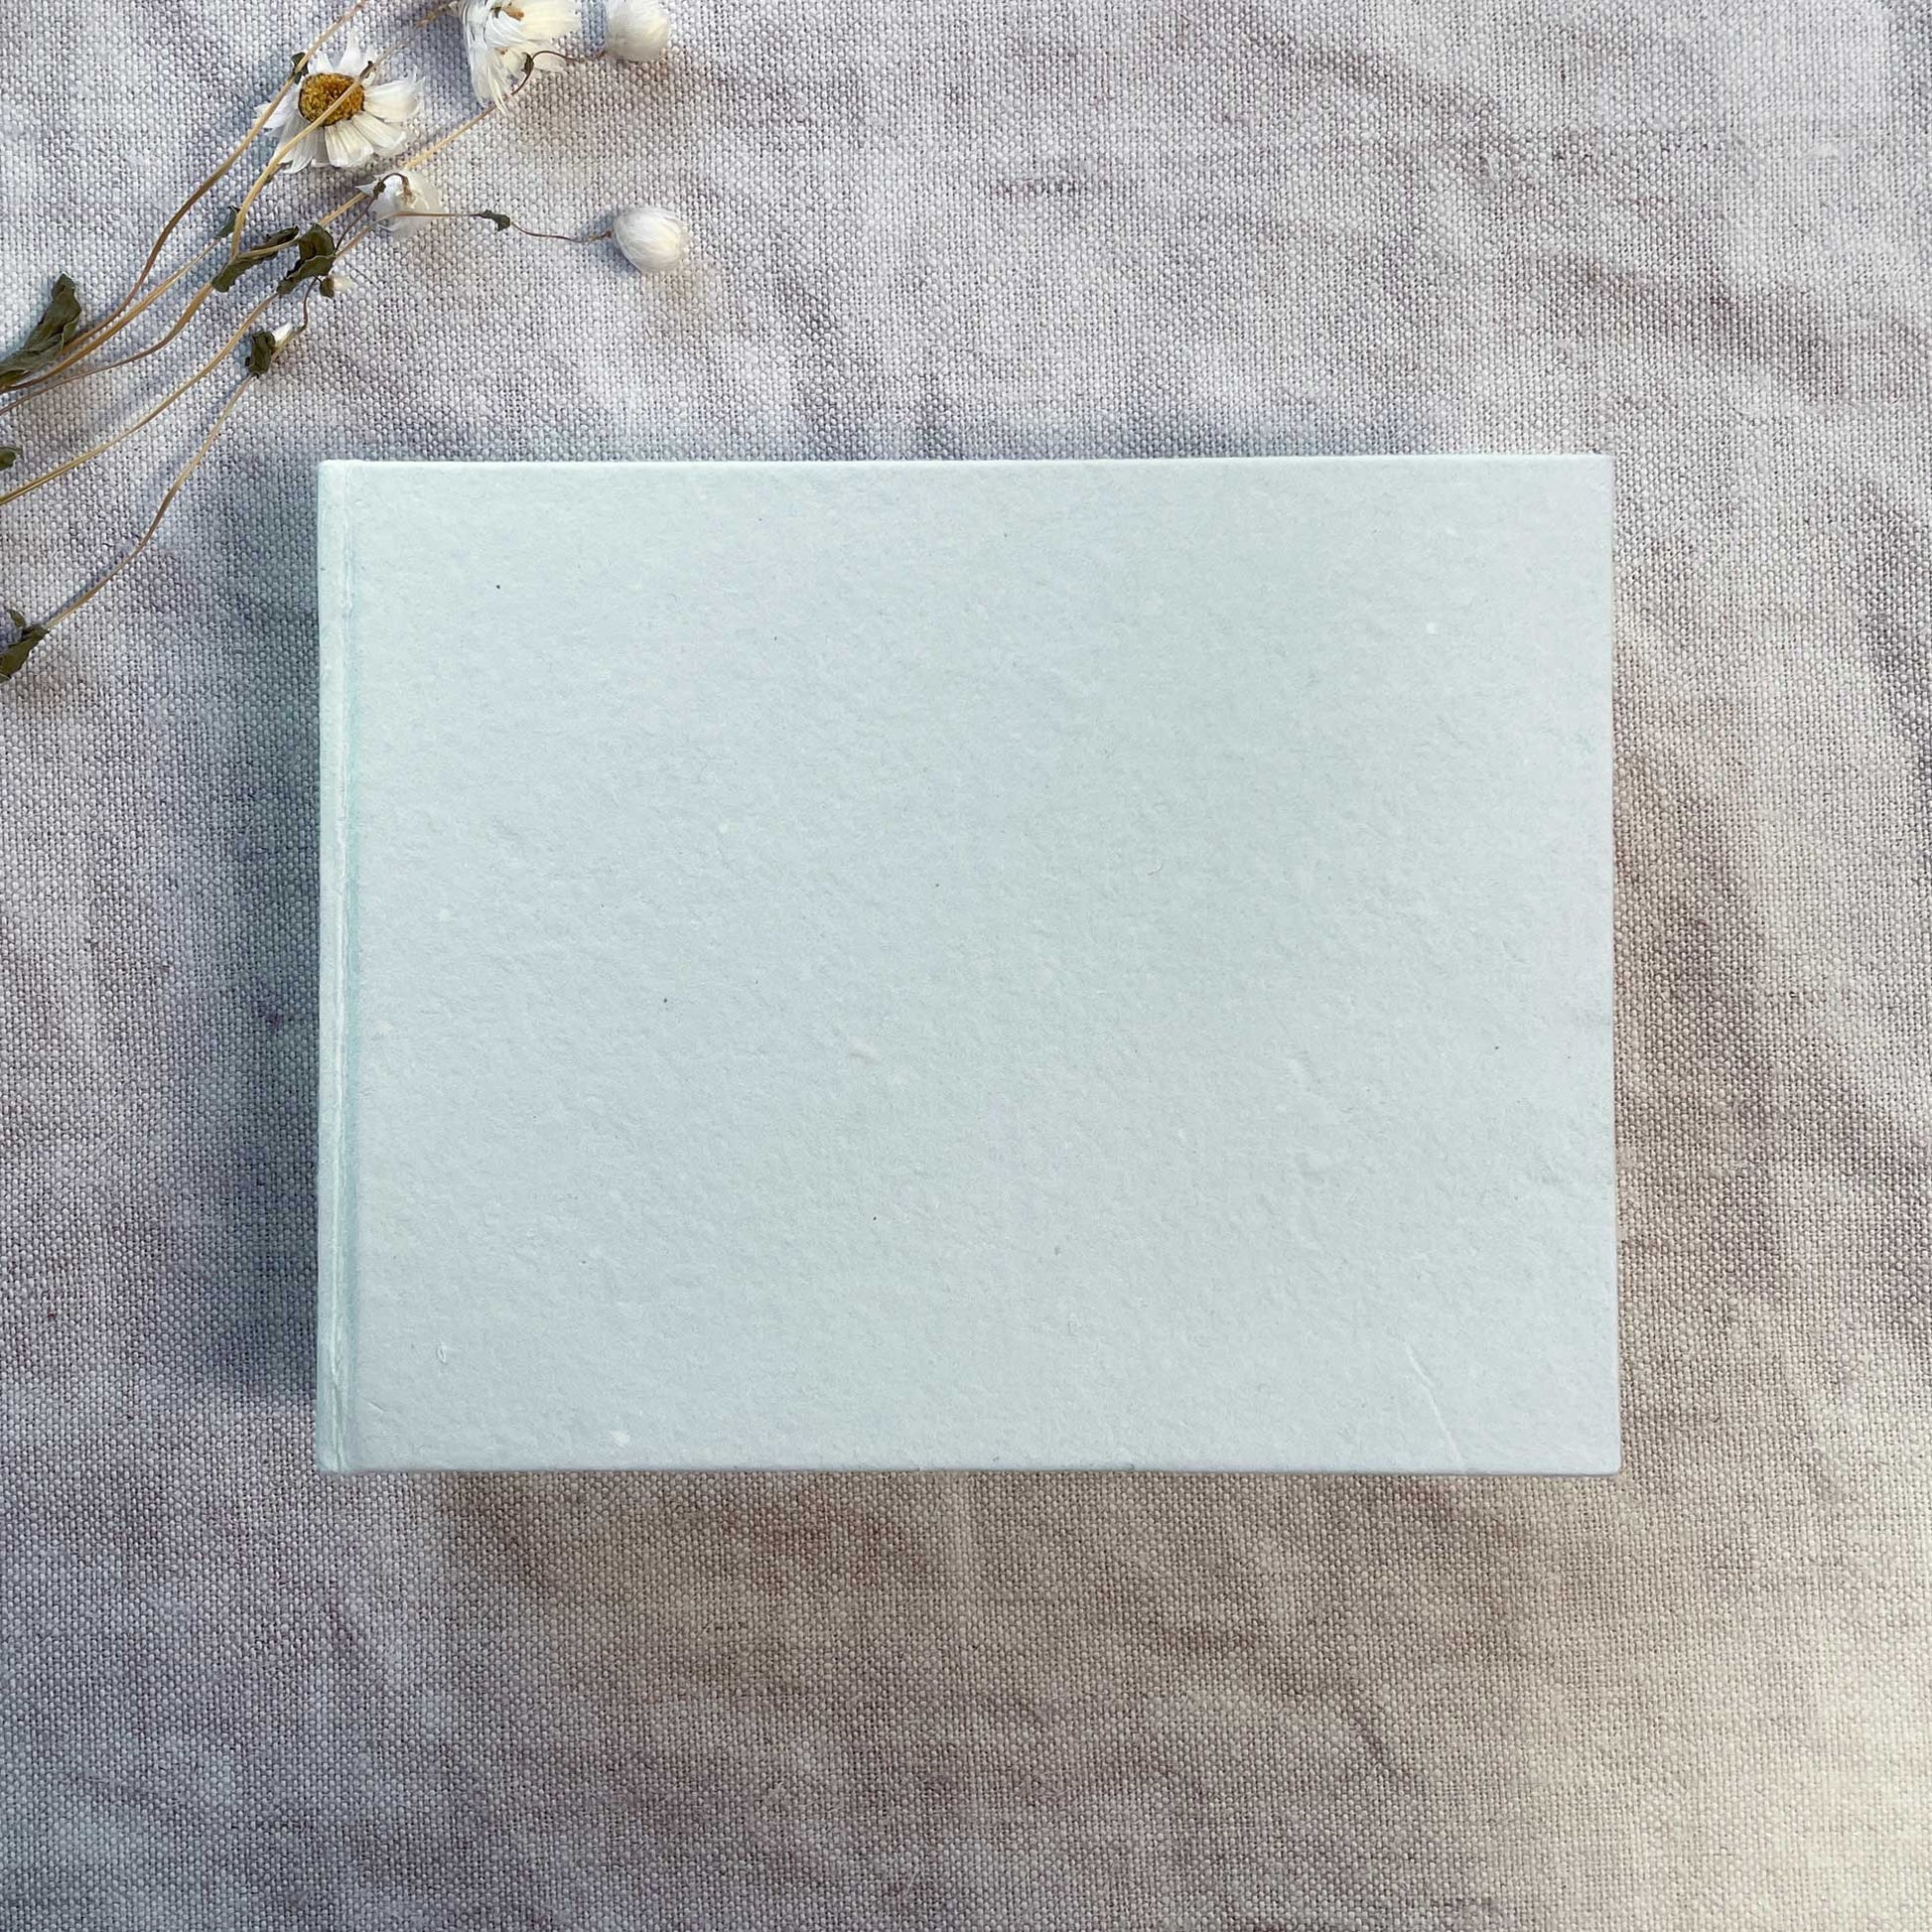 handmade journal made from recycled paper.  Blank book in light blue with white handmade cotton rag paper pages.  Hand bound.  Perfect to decorate as a guest book, journal, notepad or artist sketch page.  Light blue cover